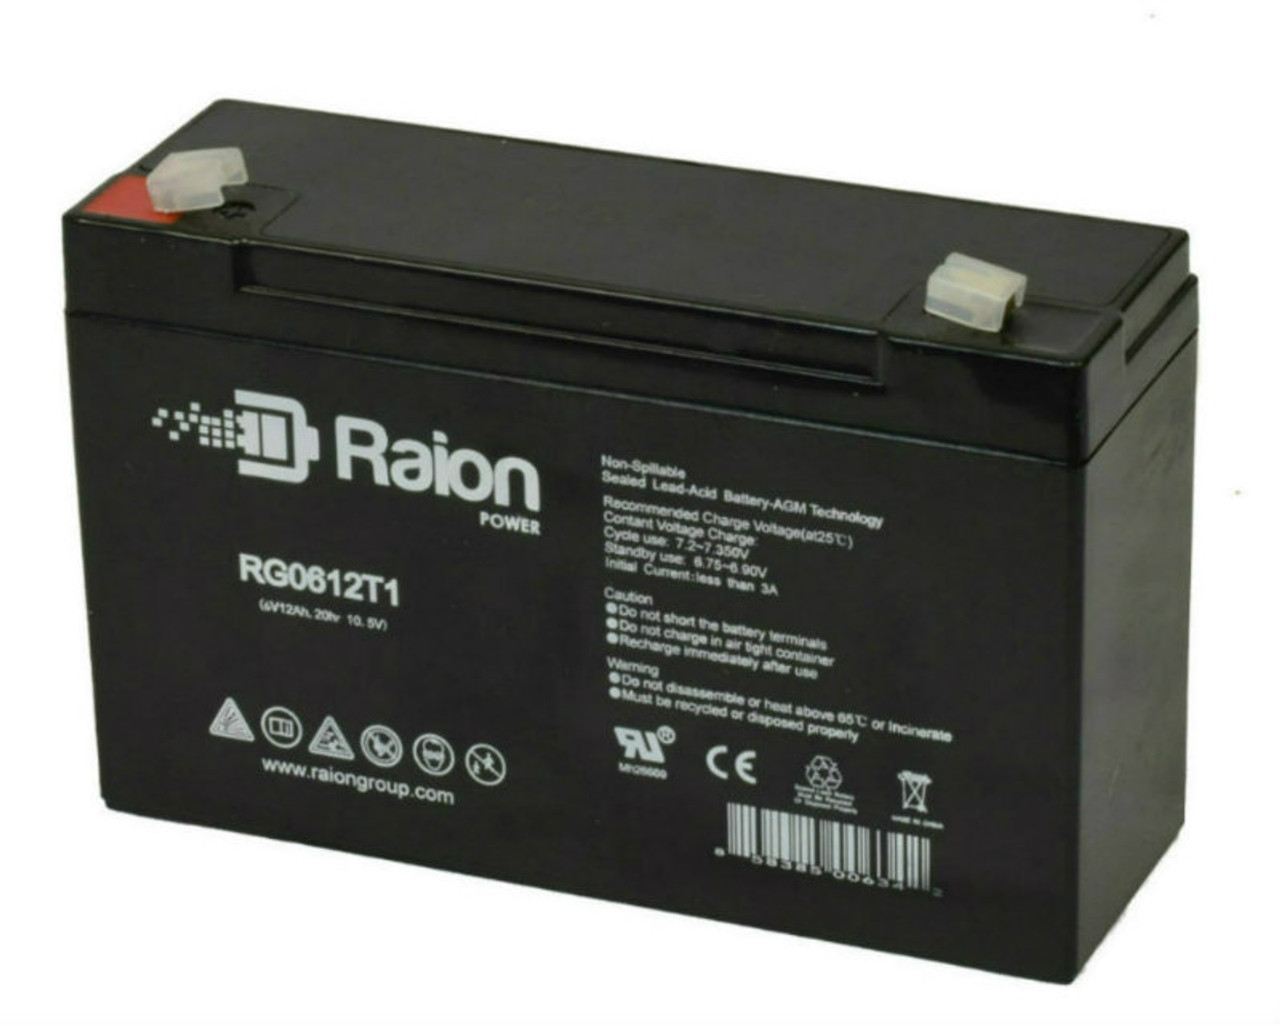 Raion Power RG06120T1 Replacement Battery for Streamlight SL40X-F2